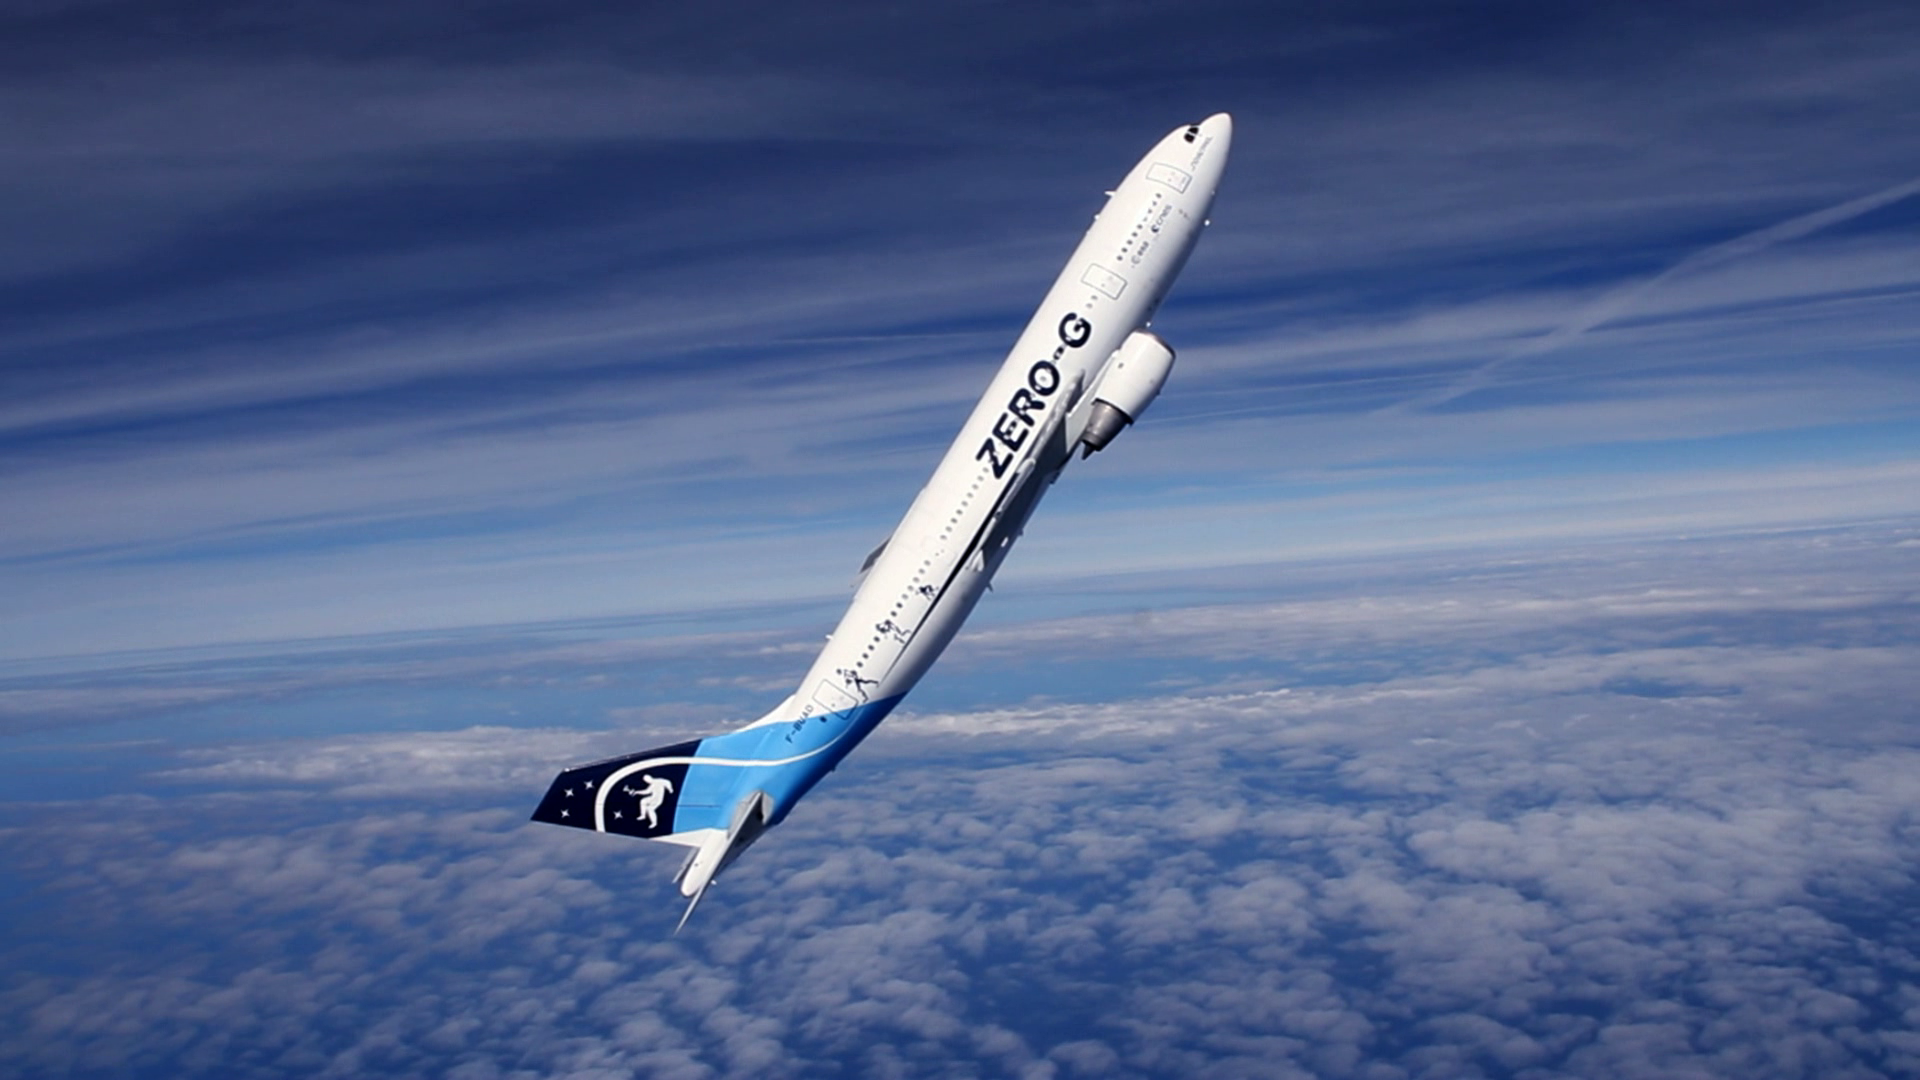 Zero-G Flight Review: An $8,000 Ride That Trains Astronauts for Weightlessness